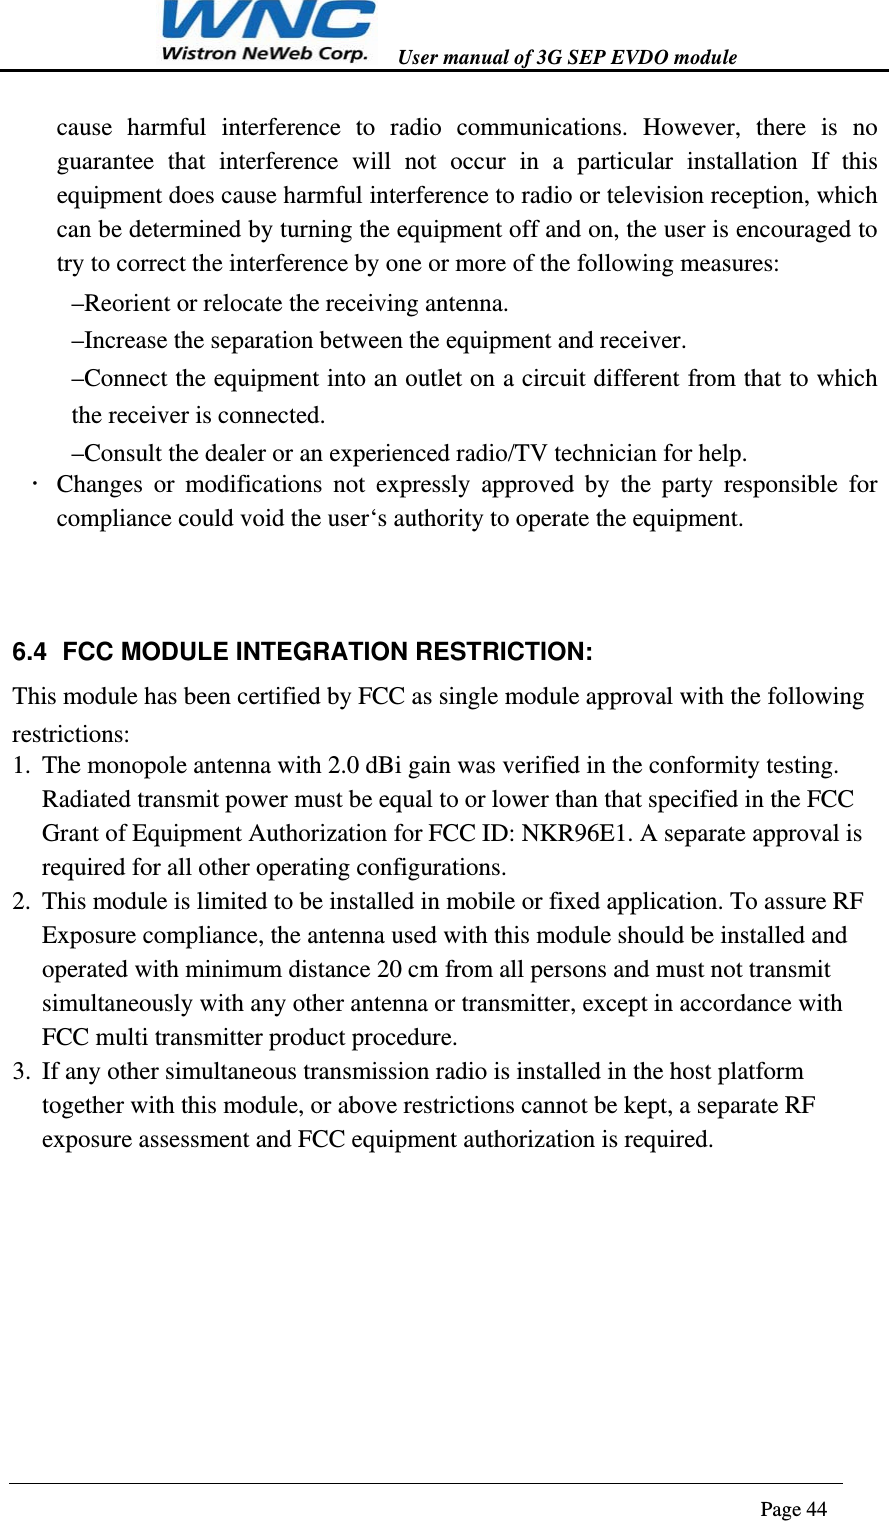   User manual of 3G SEP EVDO module                                                                      Page 44  cause harmful interference to radio communications. However, there is no guarantee that interference will not occur in a particular installation If this equipment does cause harmful interference to radio or television reception, which can be determined by turning the equipment off and on, the user is encouraged to try to correct the interference by one or more of the following measures: –Reorient or relocate the receiving antenna. –Increase the separation between the equipment and receiver. –Connect the equipment into an outlet on a circuit different from that to which the receiver is connected. –Consult the dealer or an experienced radio/TV technician for help.  Changes or modifications not expressly approved by the party responsible for compliance could void the user‘s authority to operate the equipment.  6.4  FCC MODULE INTEGRATION RESTRICTION: This module has been certified by FCC as single module approval with the following restrictions: 1. The monopole antenna with 2.0 dBi gain was verified in the conformity testing. Radiated transmit power must be equal to or lower than that specified in the FCC Grant of Equipment Authorization for FCC ID: NKR96E1. A separate approval is required for all other operating configurations. 2. This module is limited to be installed in mobile or fixed application. To assure RF Exposure compliance, the antenna used with this module should be installed and operated with minimum distance 20 cm from all persons and must not transmit simultaneously with any other antenna or transmitter, except in accordance with FCC multi transmitter product procedure. 3. If any other simultaneous transmission radio is installed in the host platform together with this module, or above restrictions cannot be kept, a separate RF exposure assessment and FCC equipment authorization is required.   